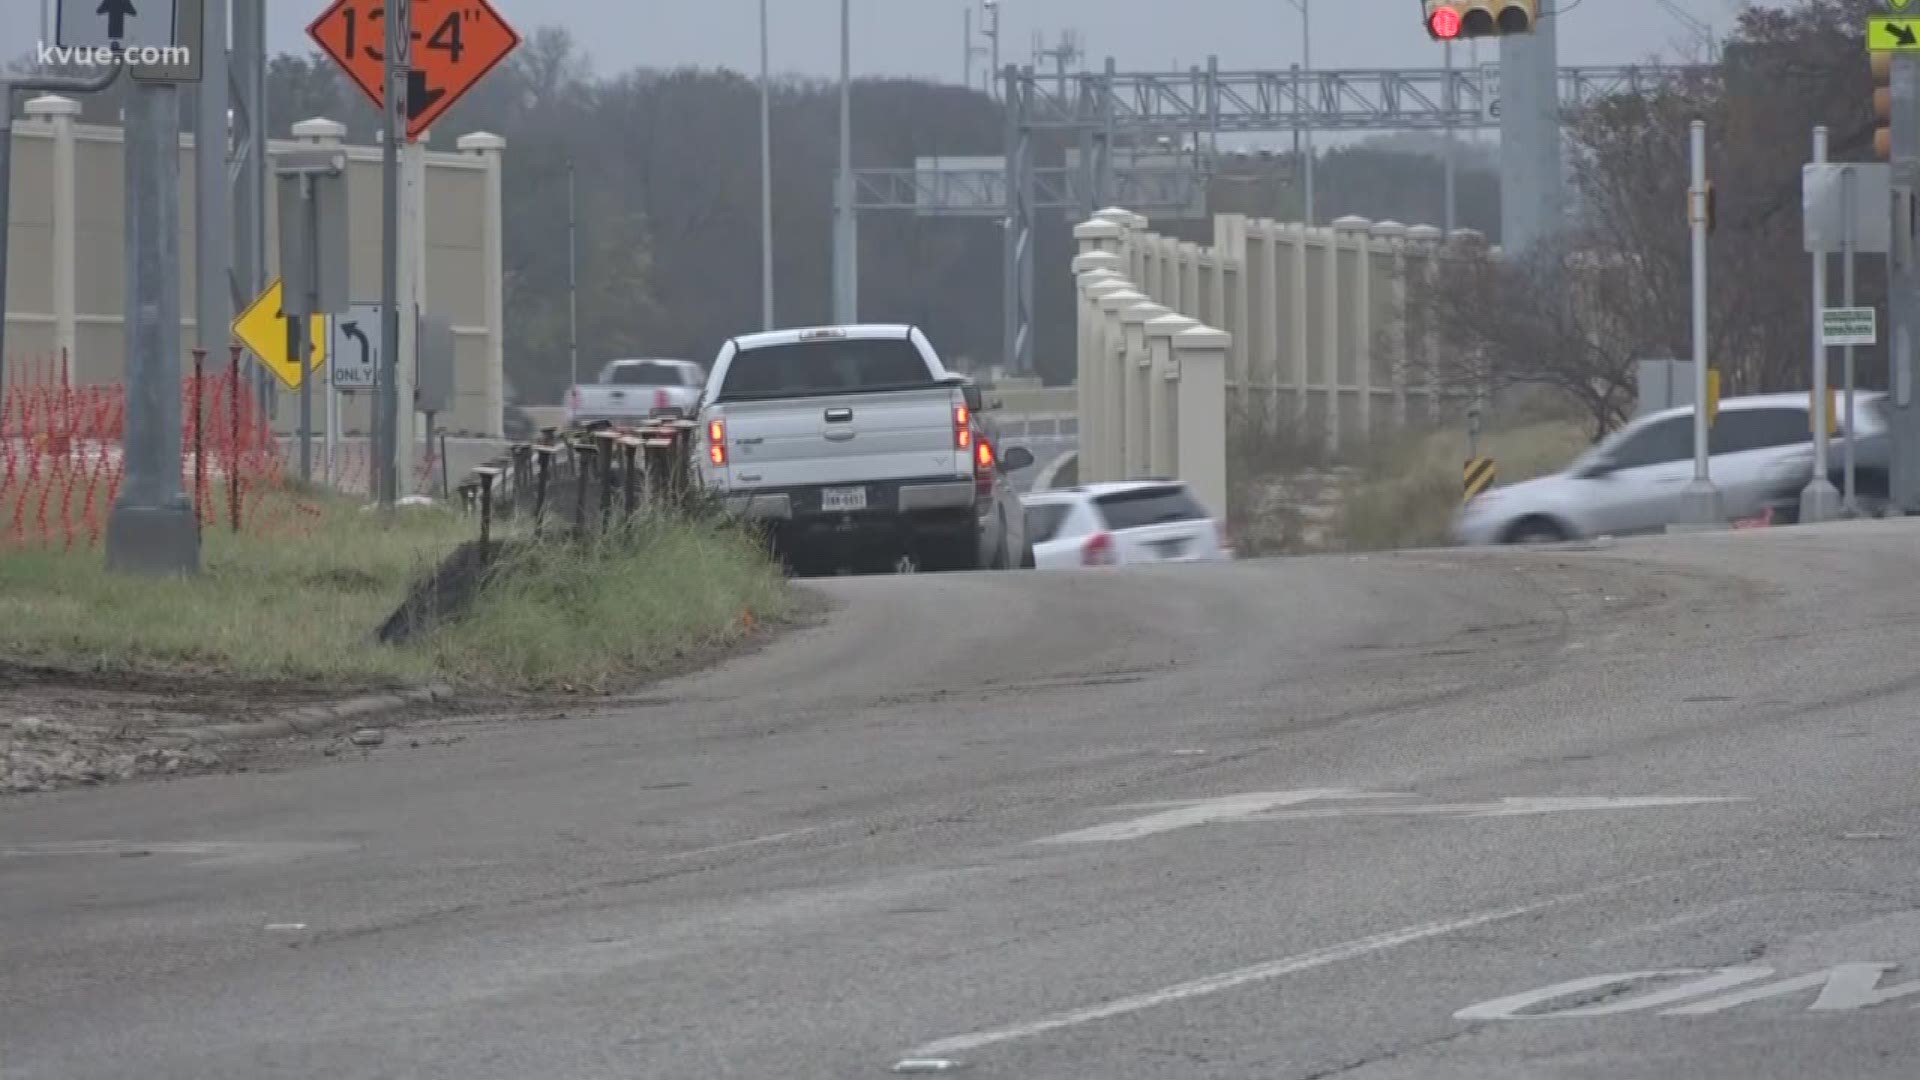 During your commute -- you may have noticed the construction of sound walls on Mopac.